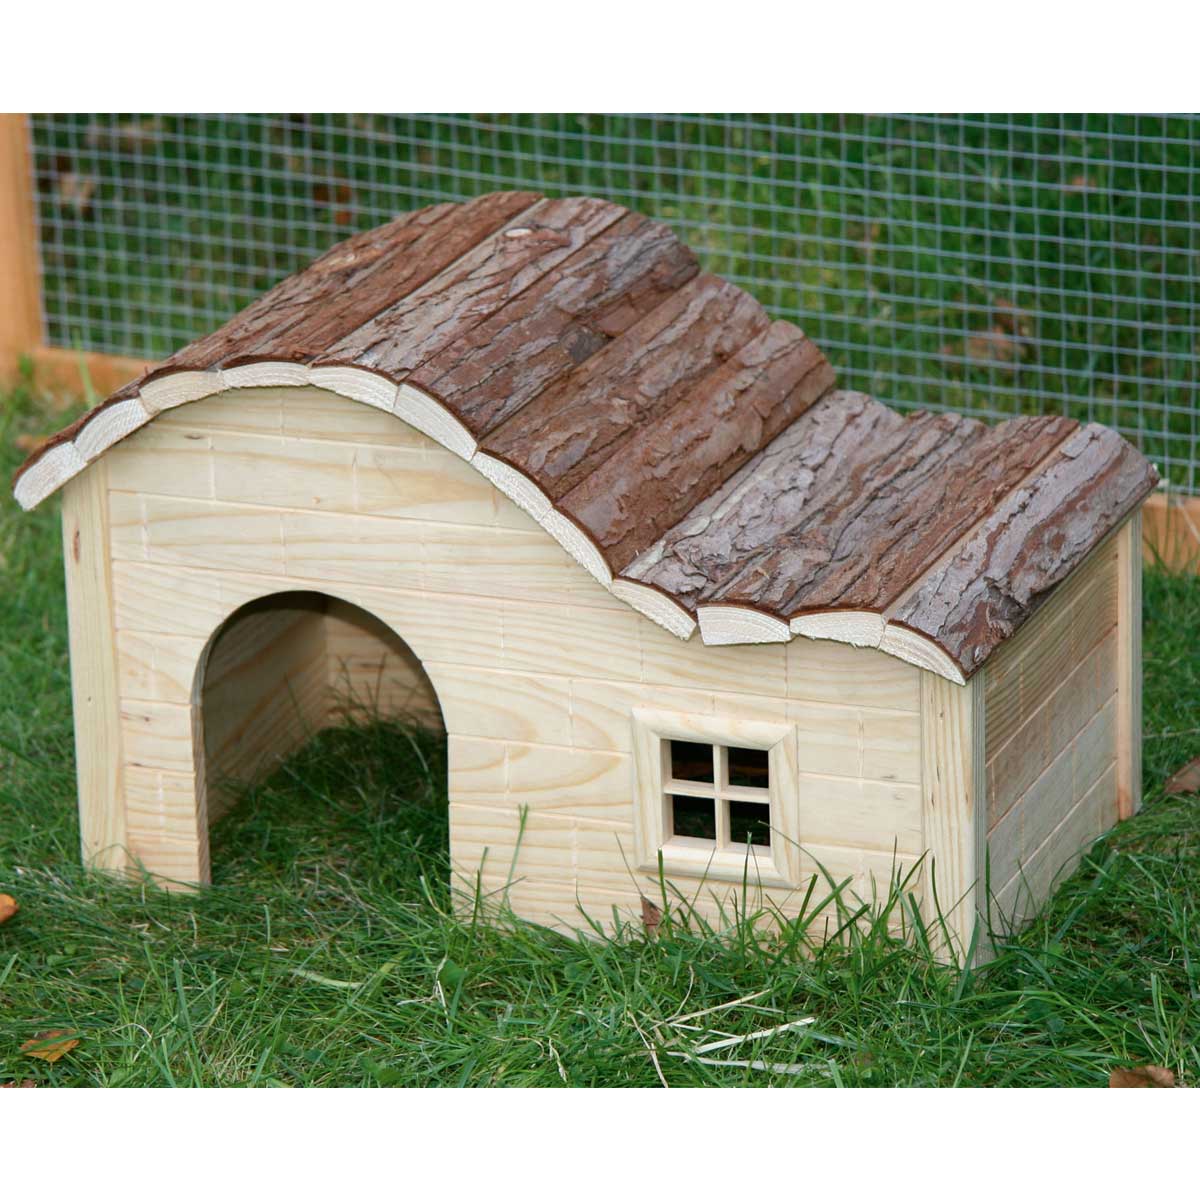 NATURE PLUS House with gently curved roof 40 x 25 x 25 cm